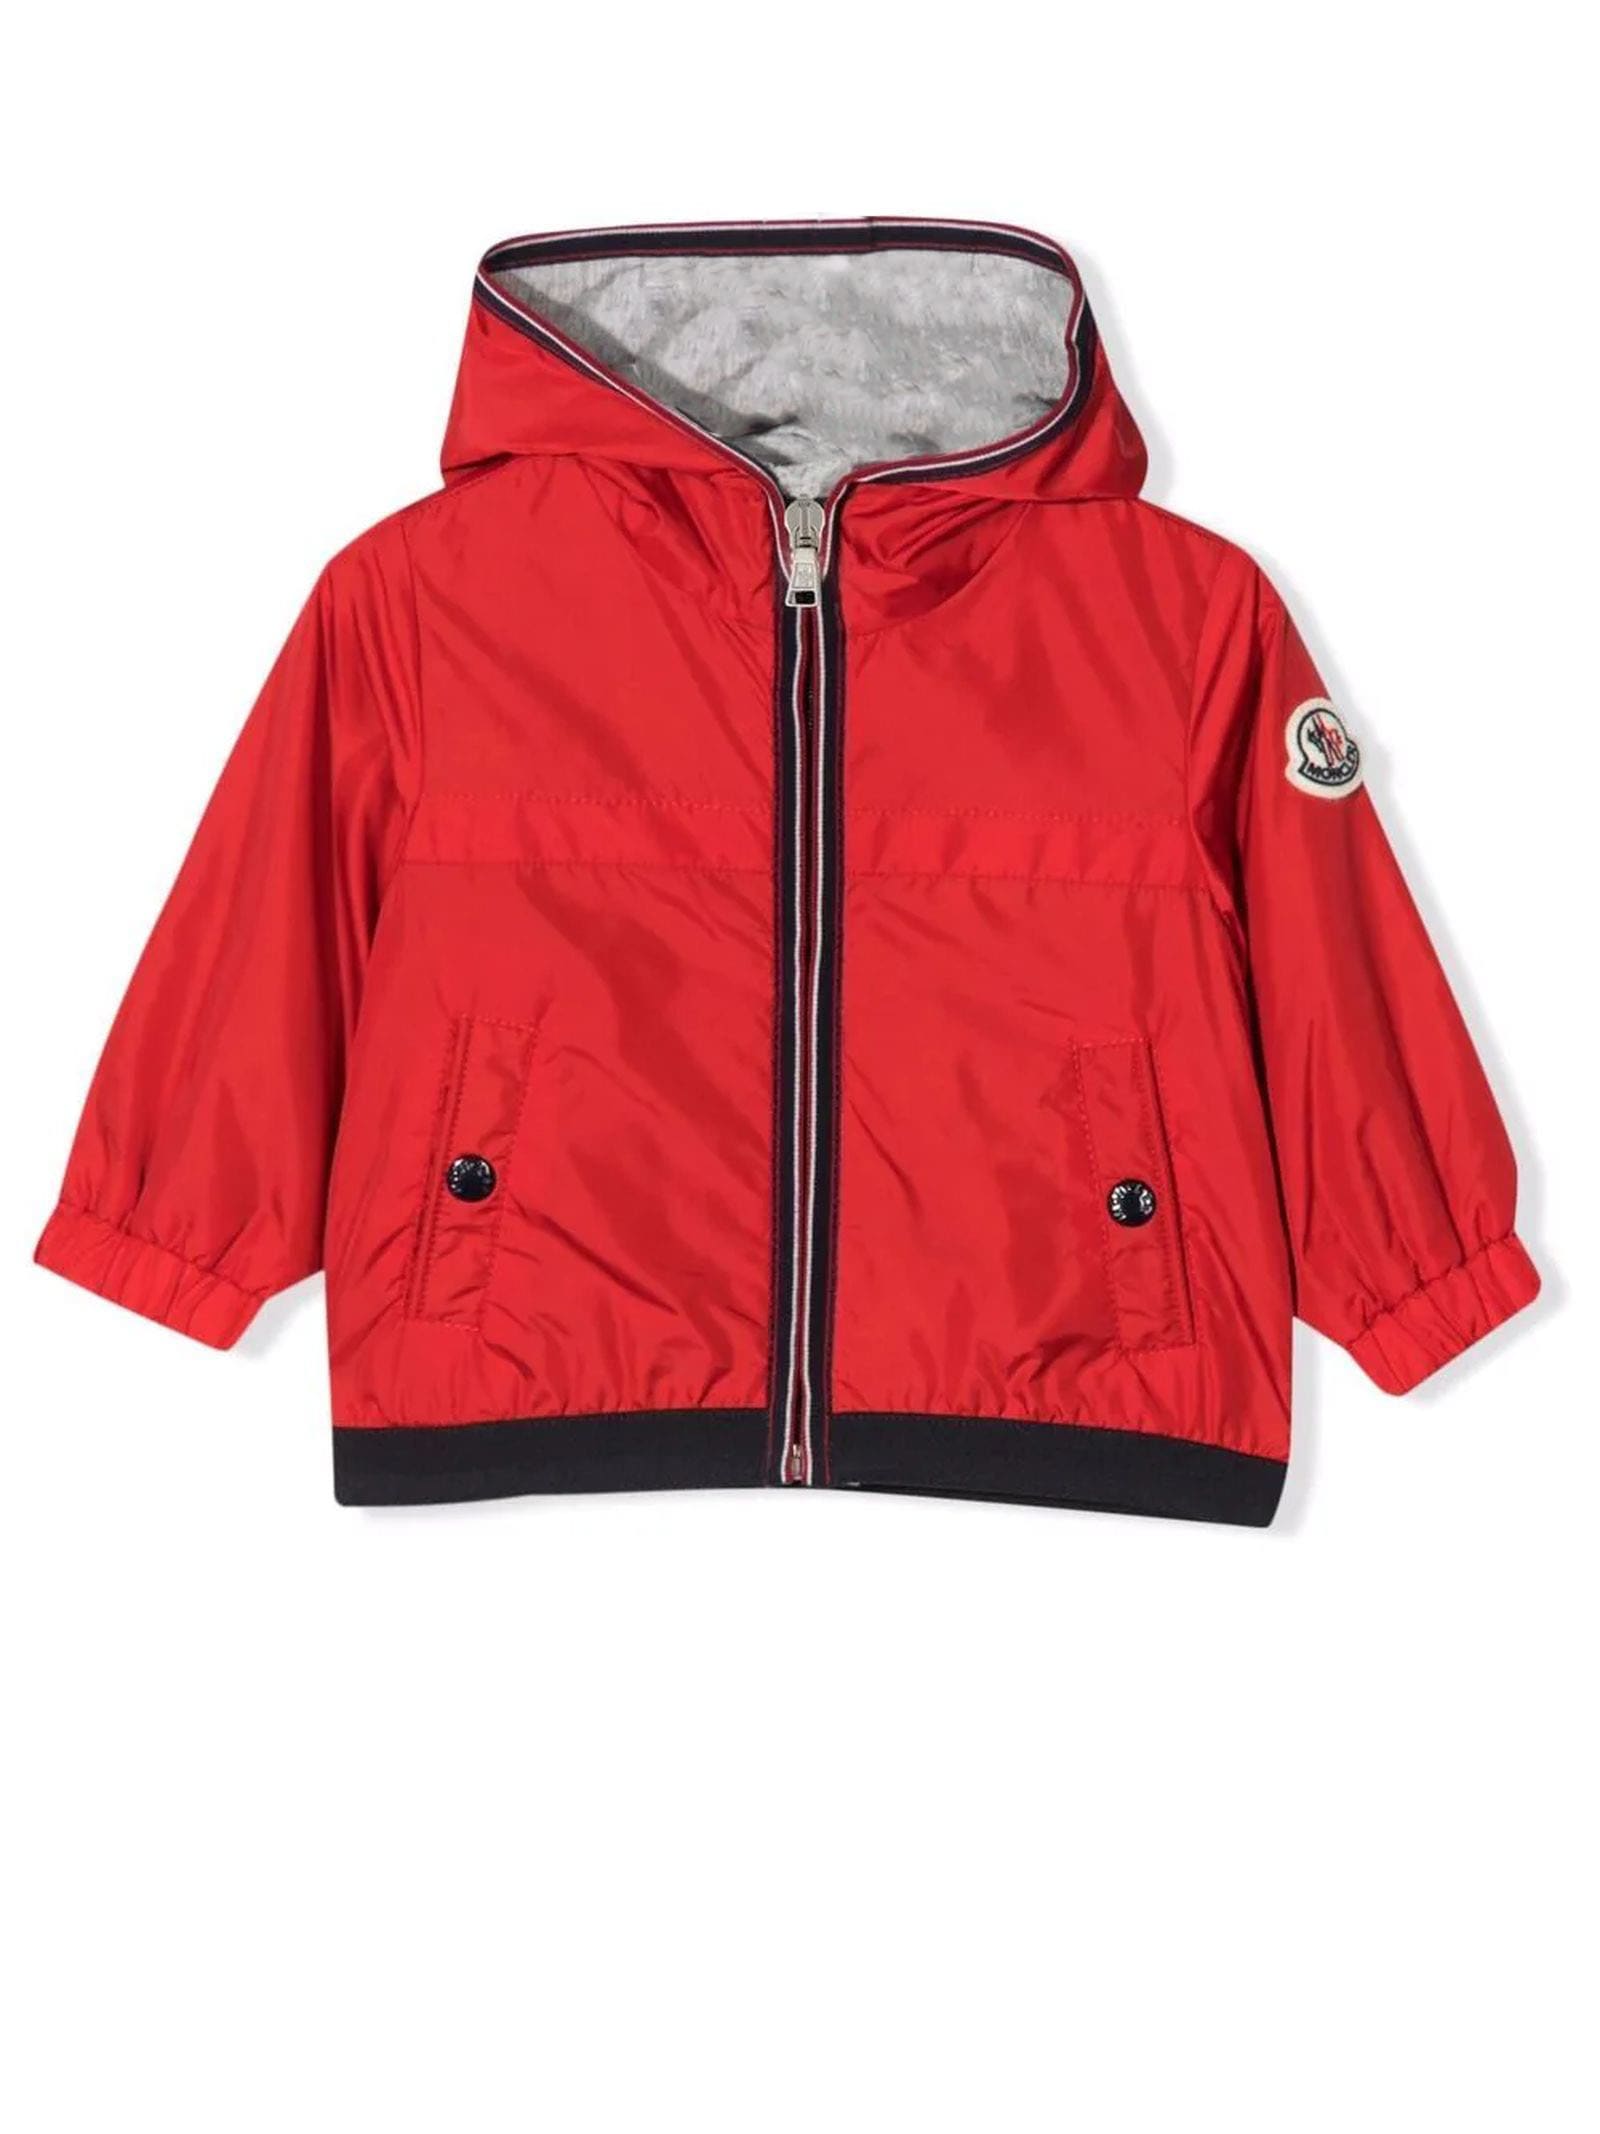 Moncler Red Cotton Jacket